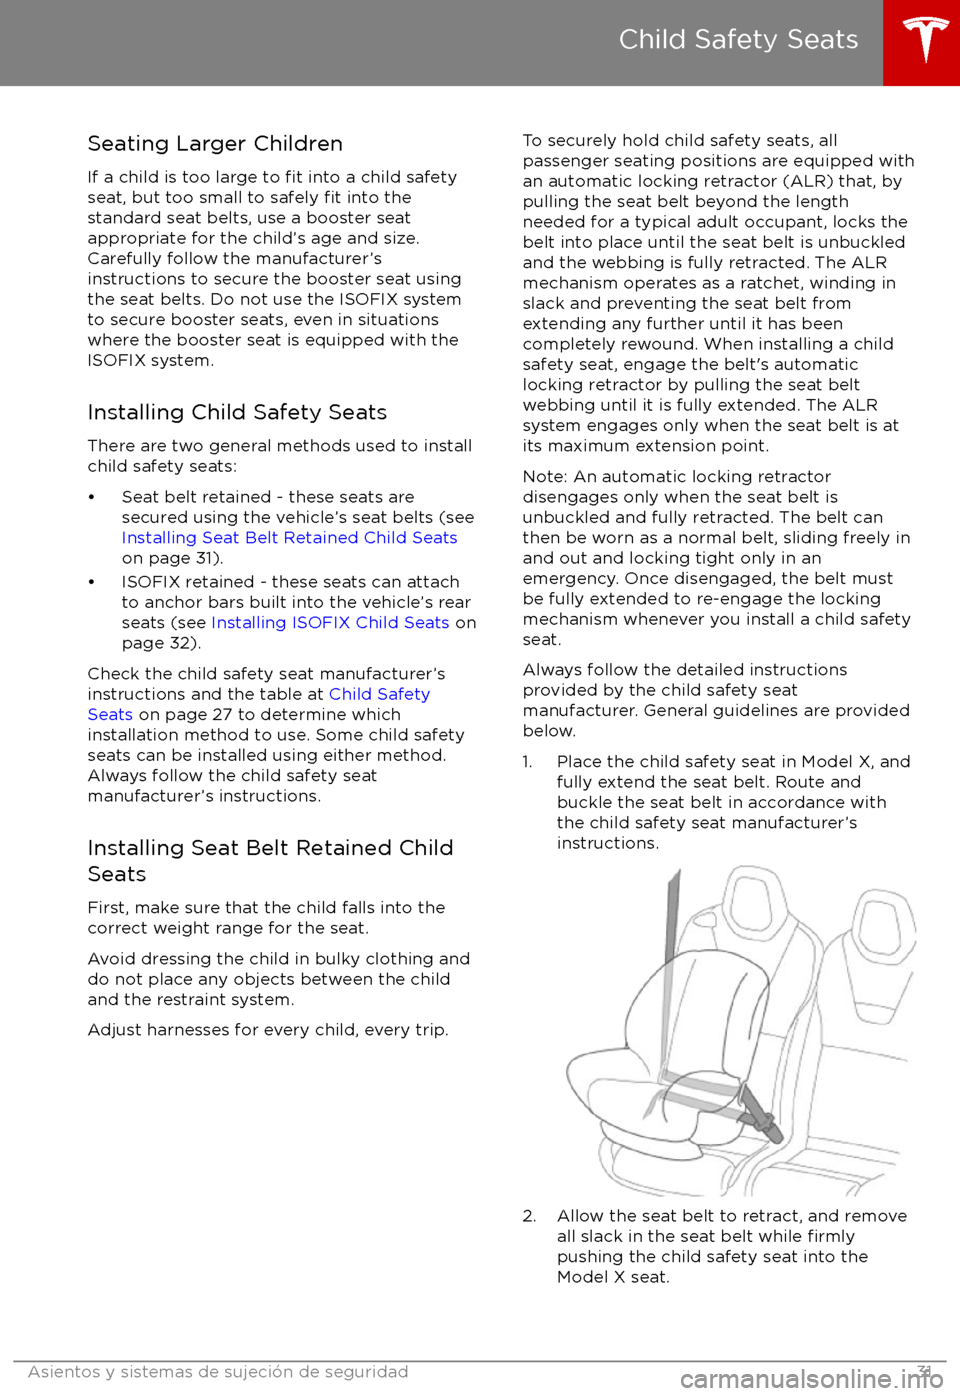 TESLA MODEL X 2017  Manual del propietario (in Spanish) Seating Larger Children
If a child is too large to 
fit into a child safety
seat, but too small to safely fit into the
standard seat belts, use a booster seat
appropriate for the child